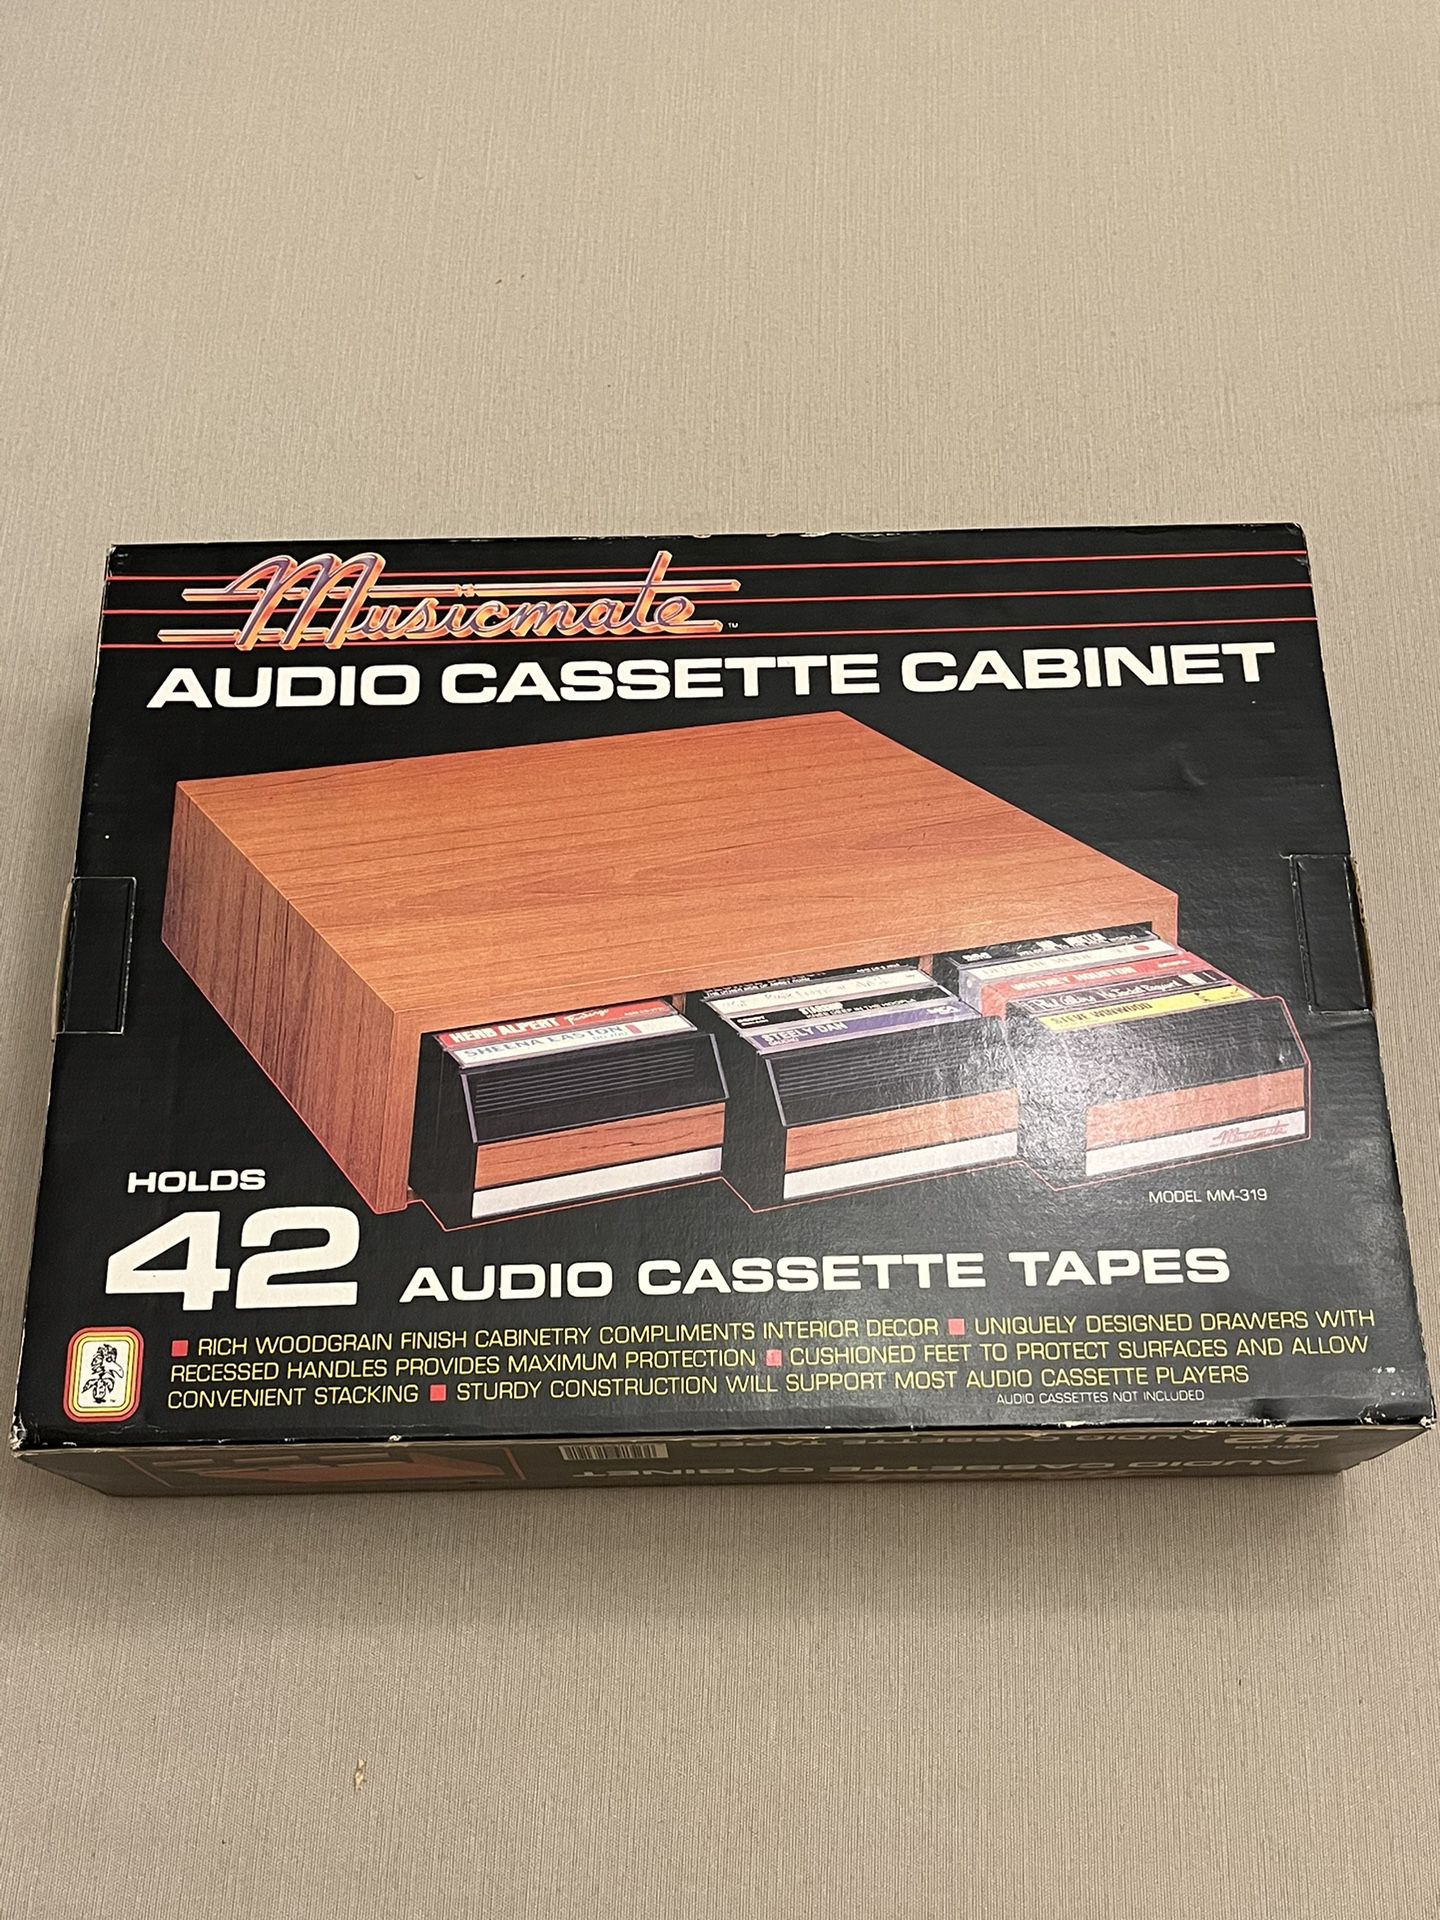 - NOS -Vintage Musicmate Audio Cassette Cabinet Holds 42 Cassettes - Brand New -